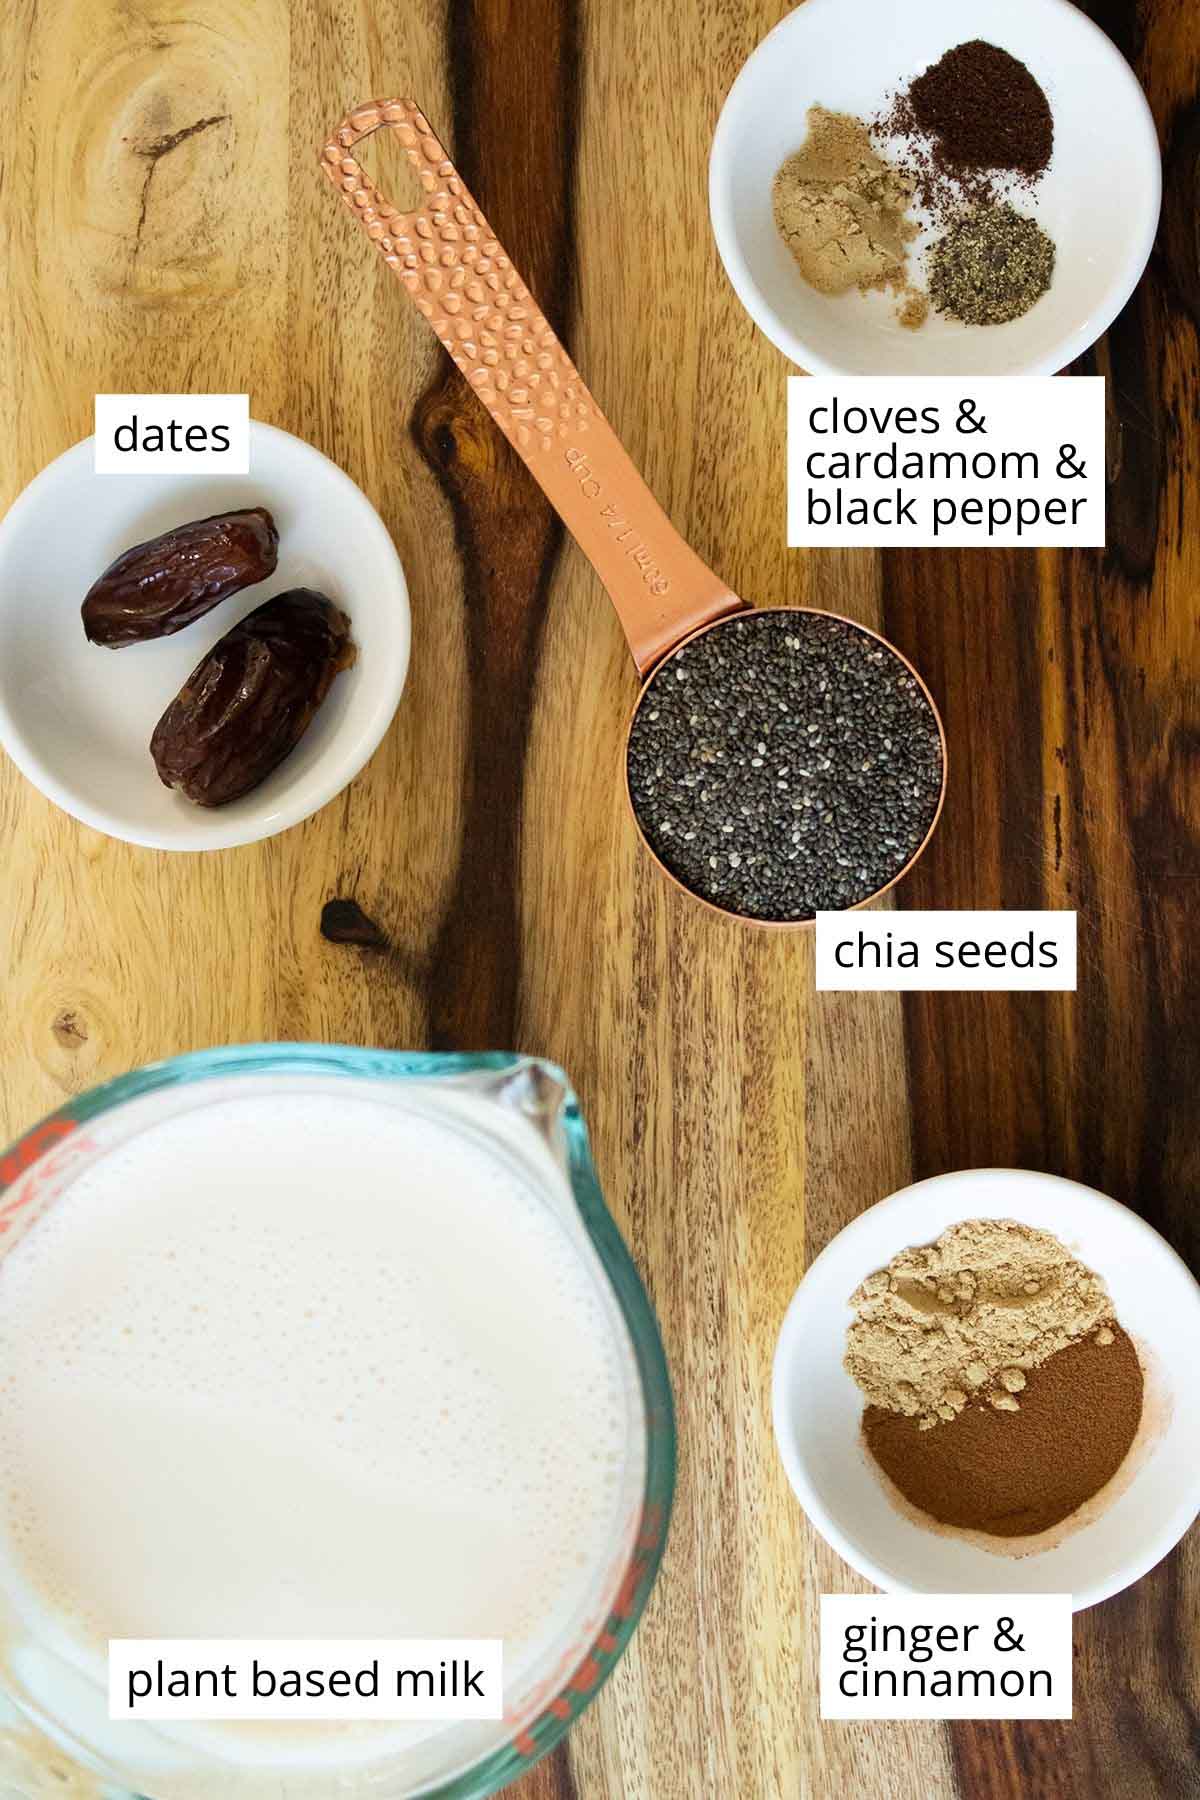 chia seeds, spices, and soy milk in cups on a wooden table